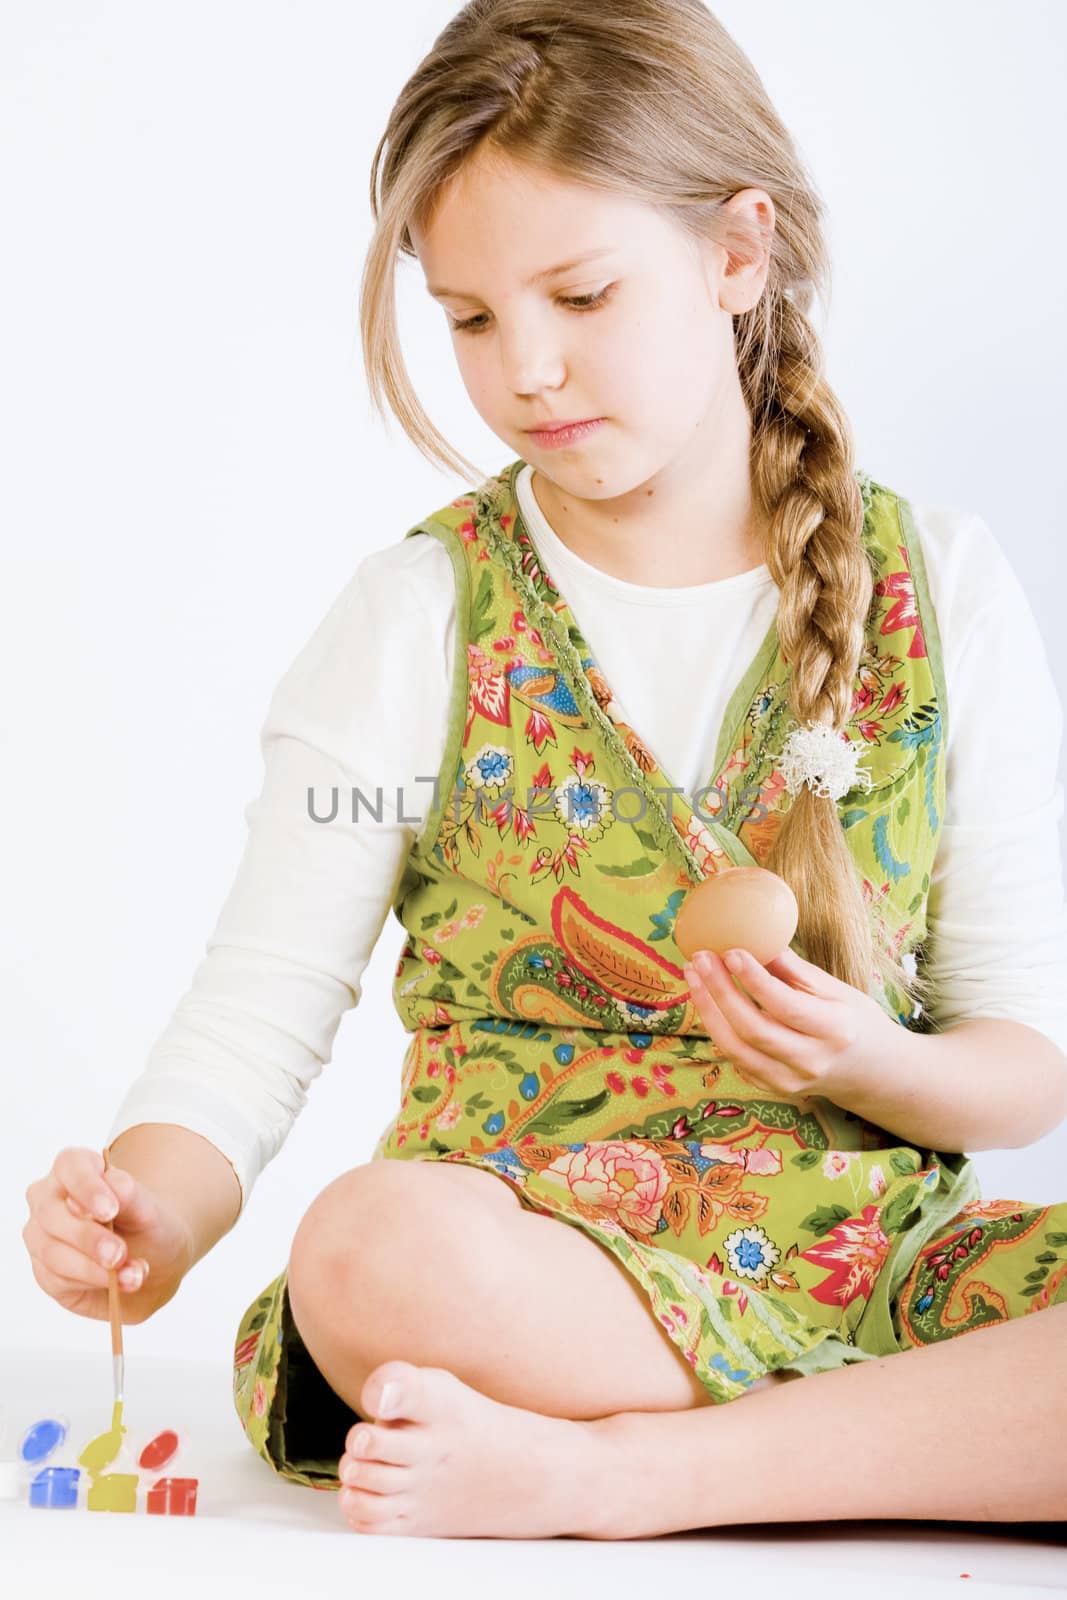 Studio portrait of a young blond girl who is painting eggs for easter